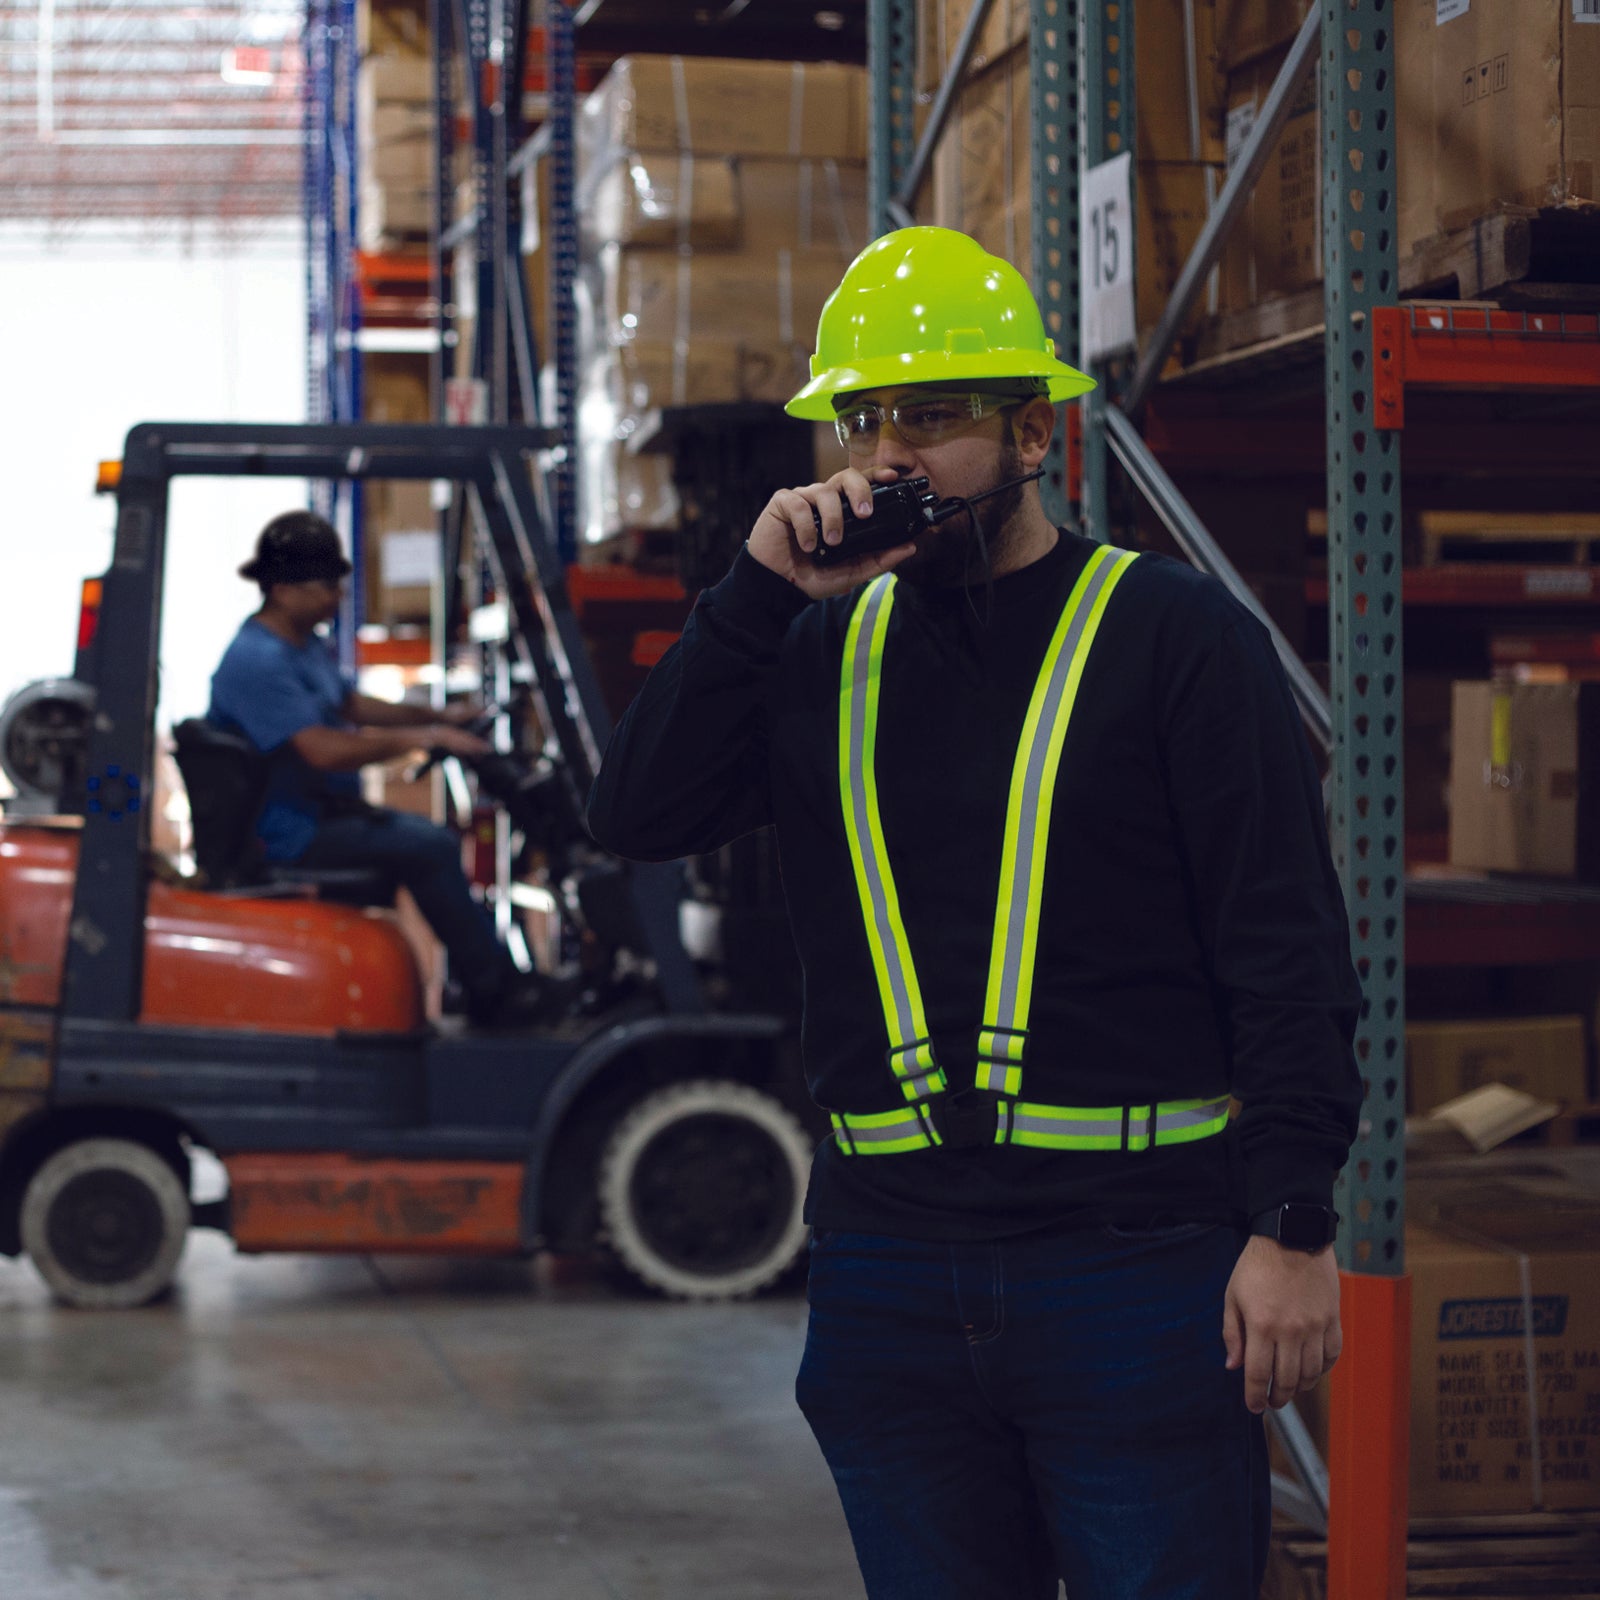 A worker wearing the lime JORESTECH safety suspenders inside a warehouse. There is a driver with a red forklift close by.